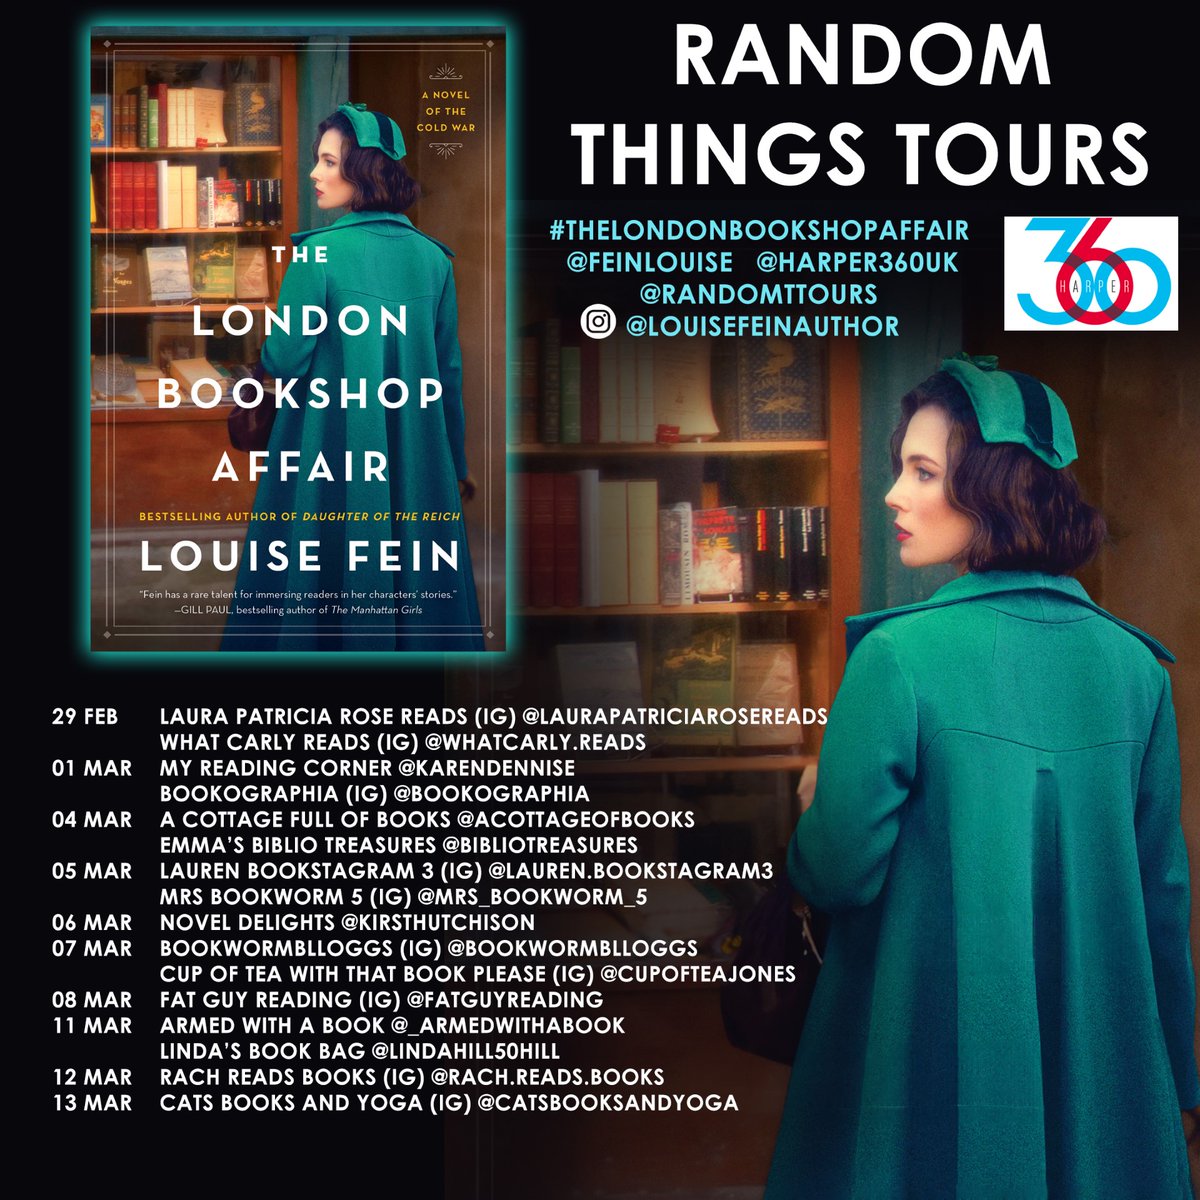 Look at this fabulous #RandomThingsTours Blog Tour for #TheLondonBookshopAffair by @FeinLouise with @Harper360UK 

Begins 29 February